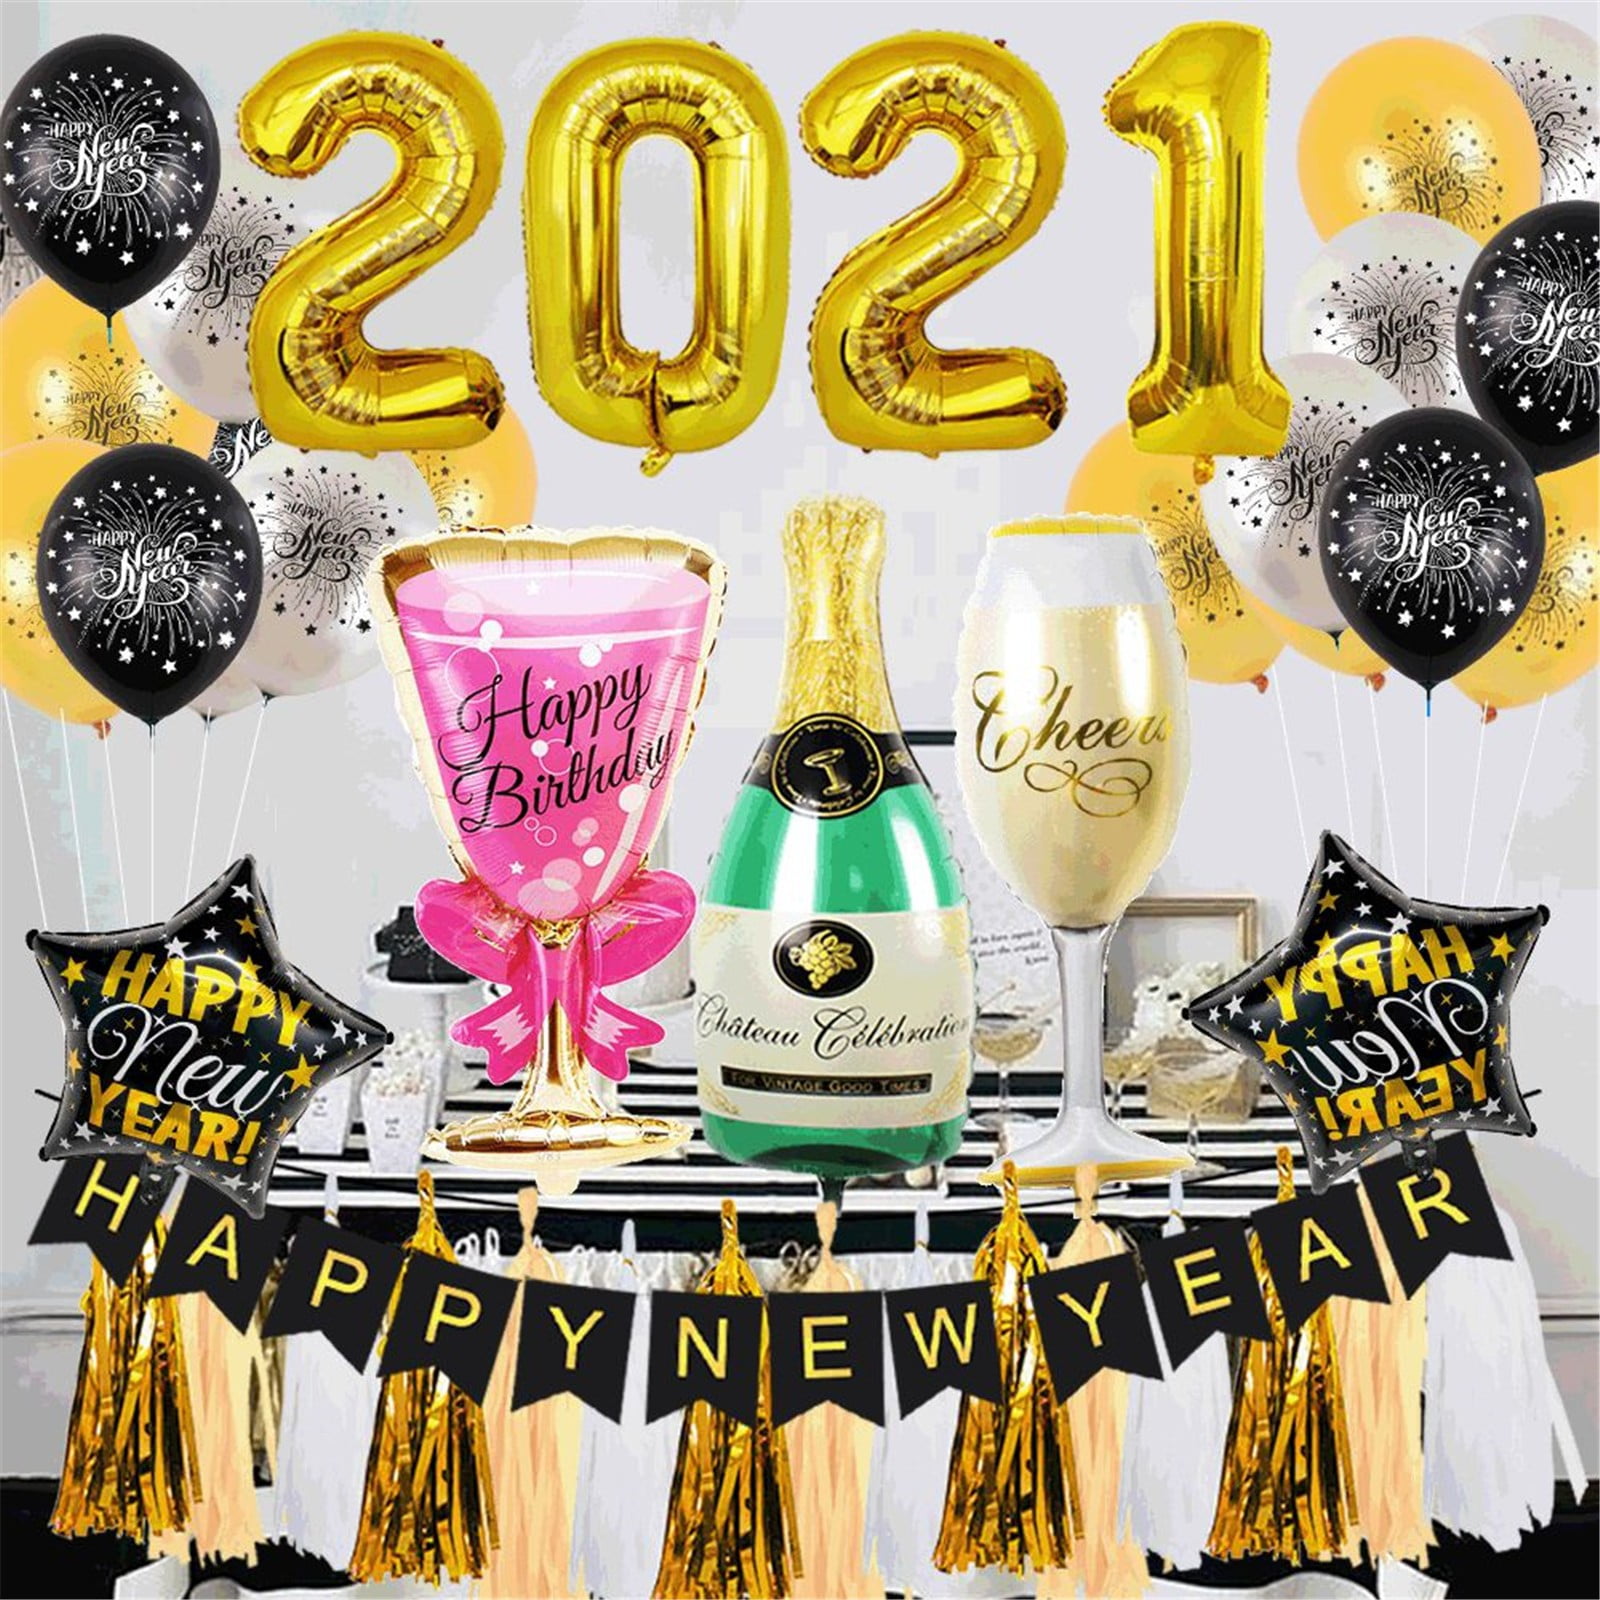 Cheers to 2021 Hello 2021 New Years Eve Party Decorations Happy New Year Banner Rose Gold 